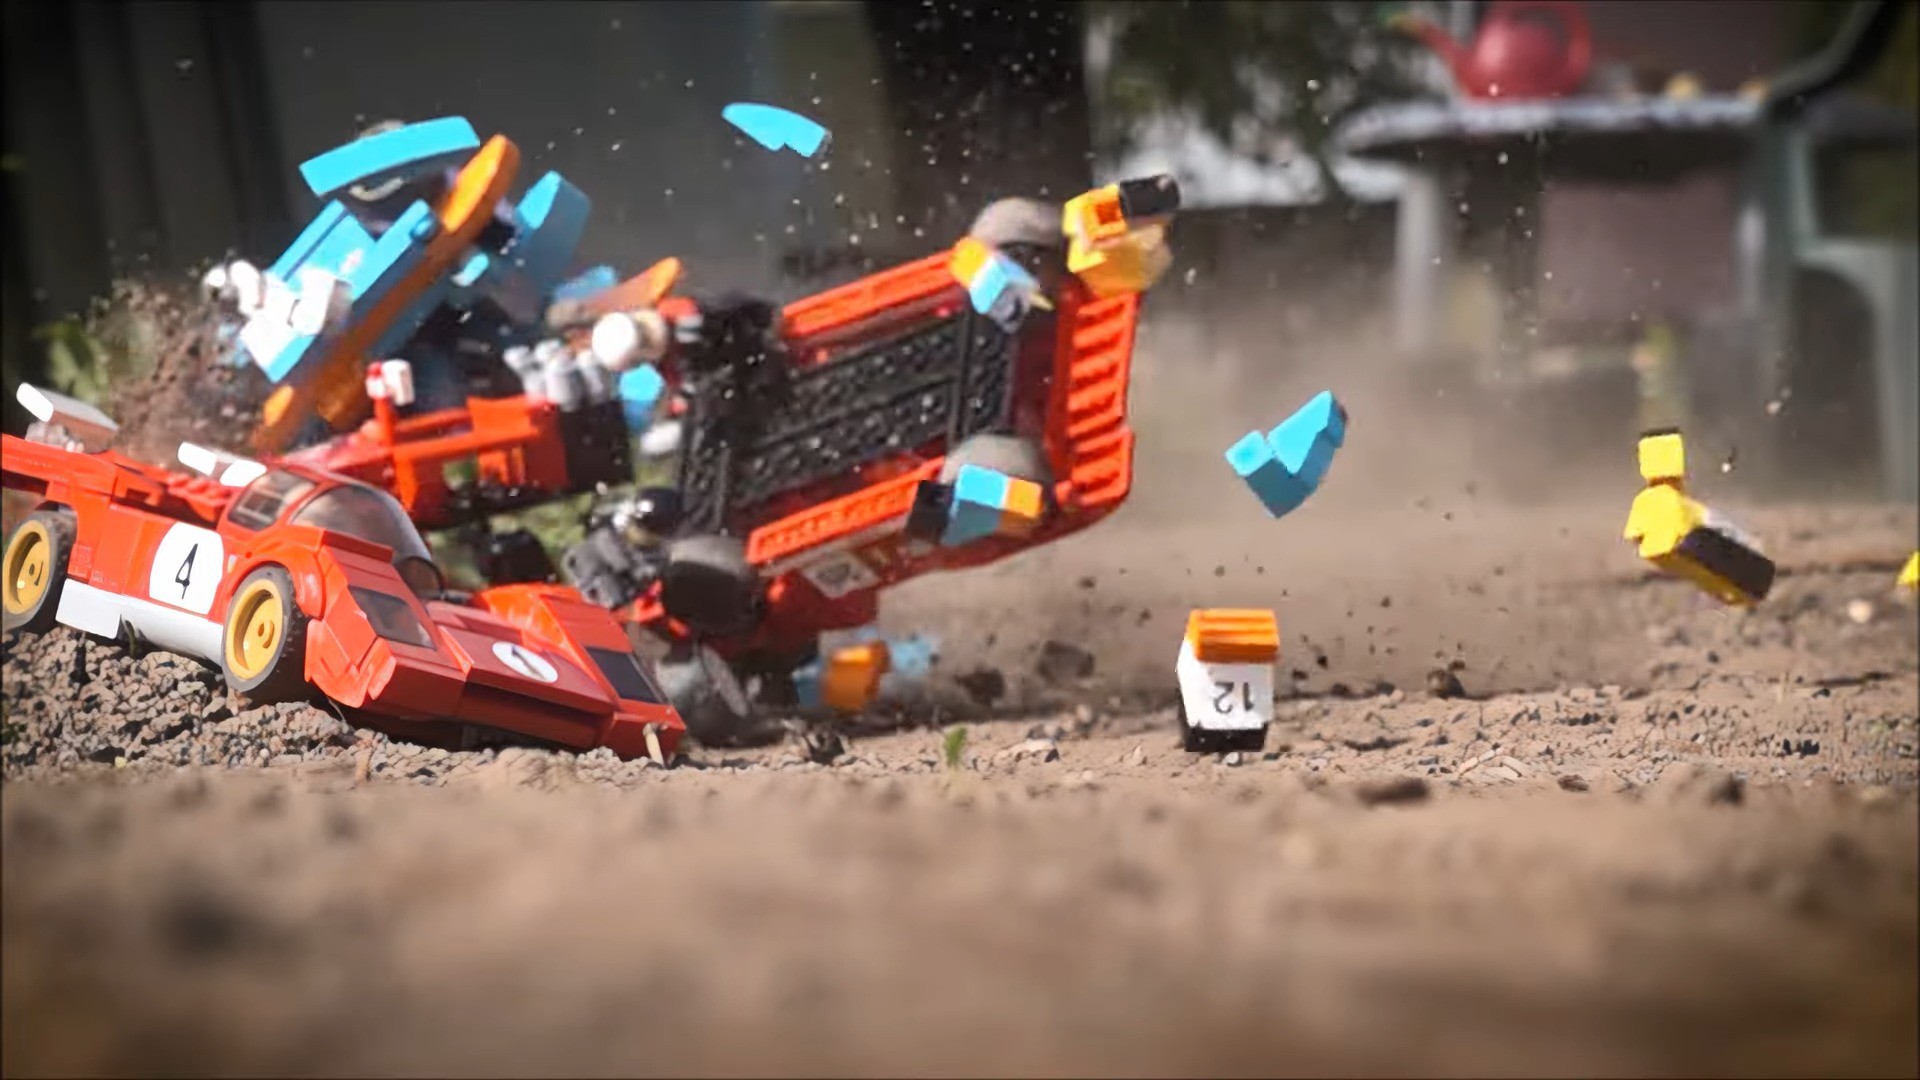 Watching These 1970s LEGO Sports Cars Crash in Slow Motion Is